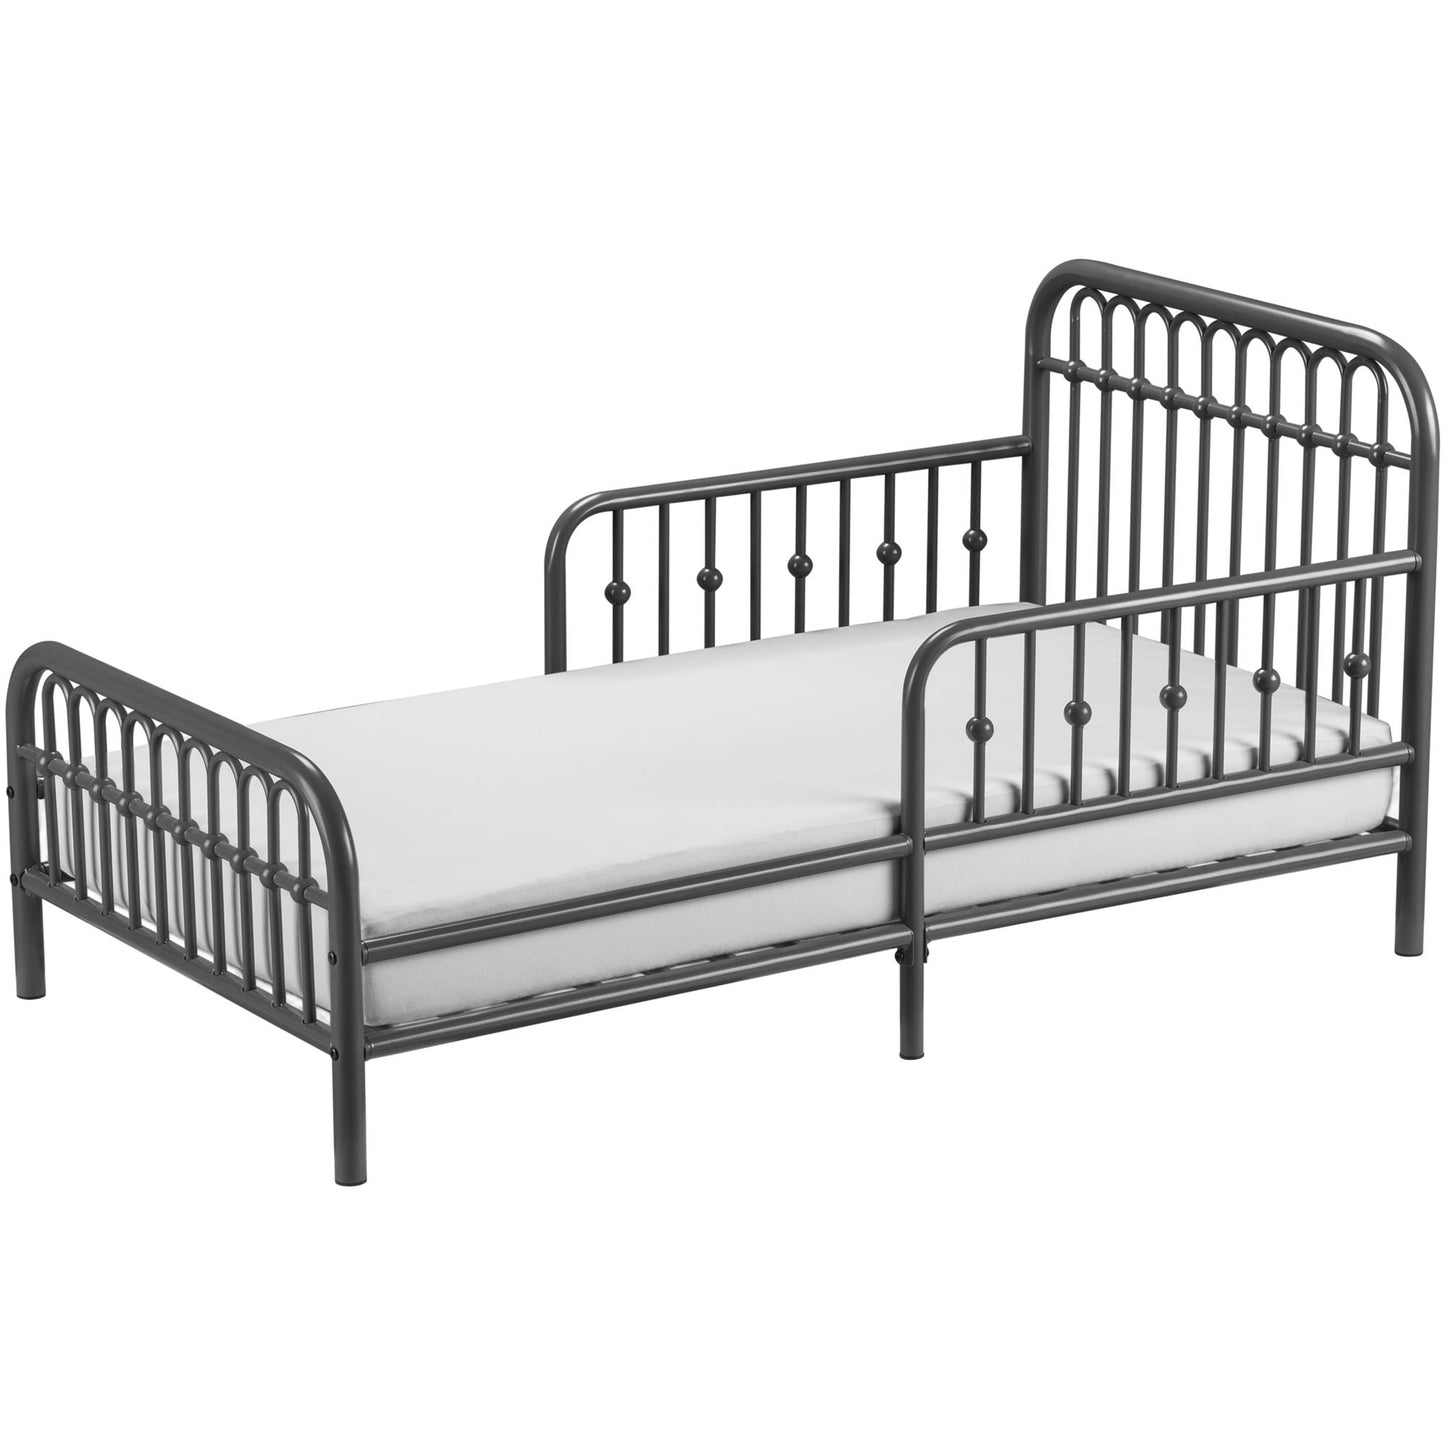 Monarch Hill Ivy Metal Toddler Bed with Classic Wrought-Iron Look - Graphite Grey